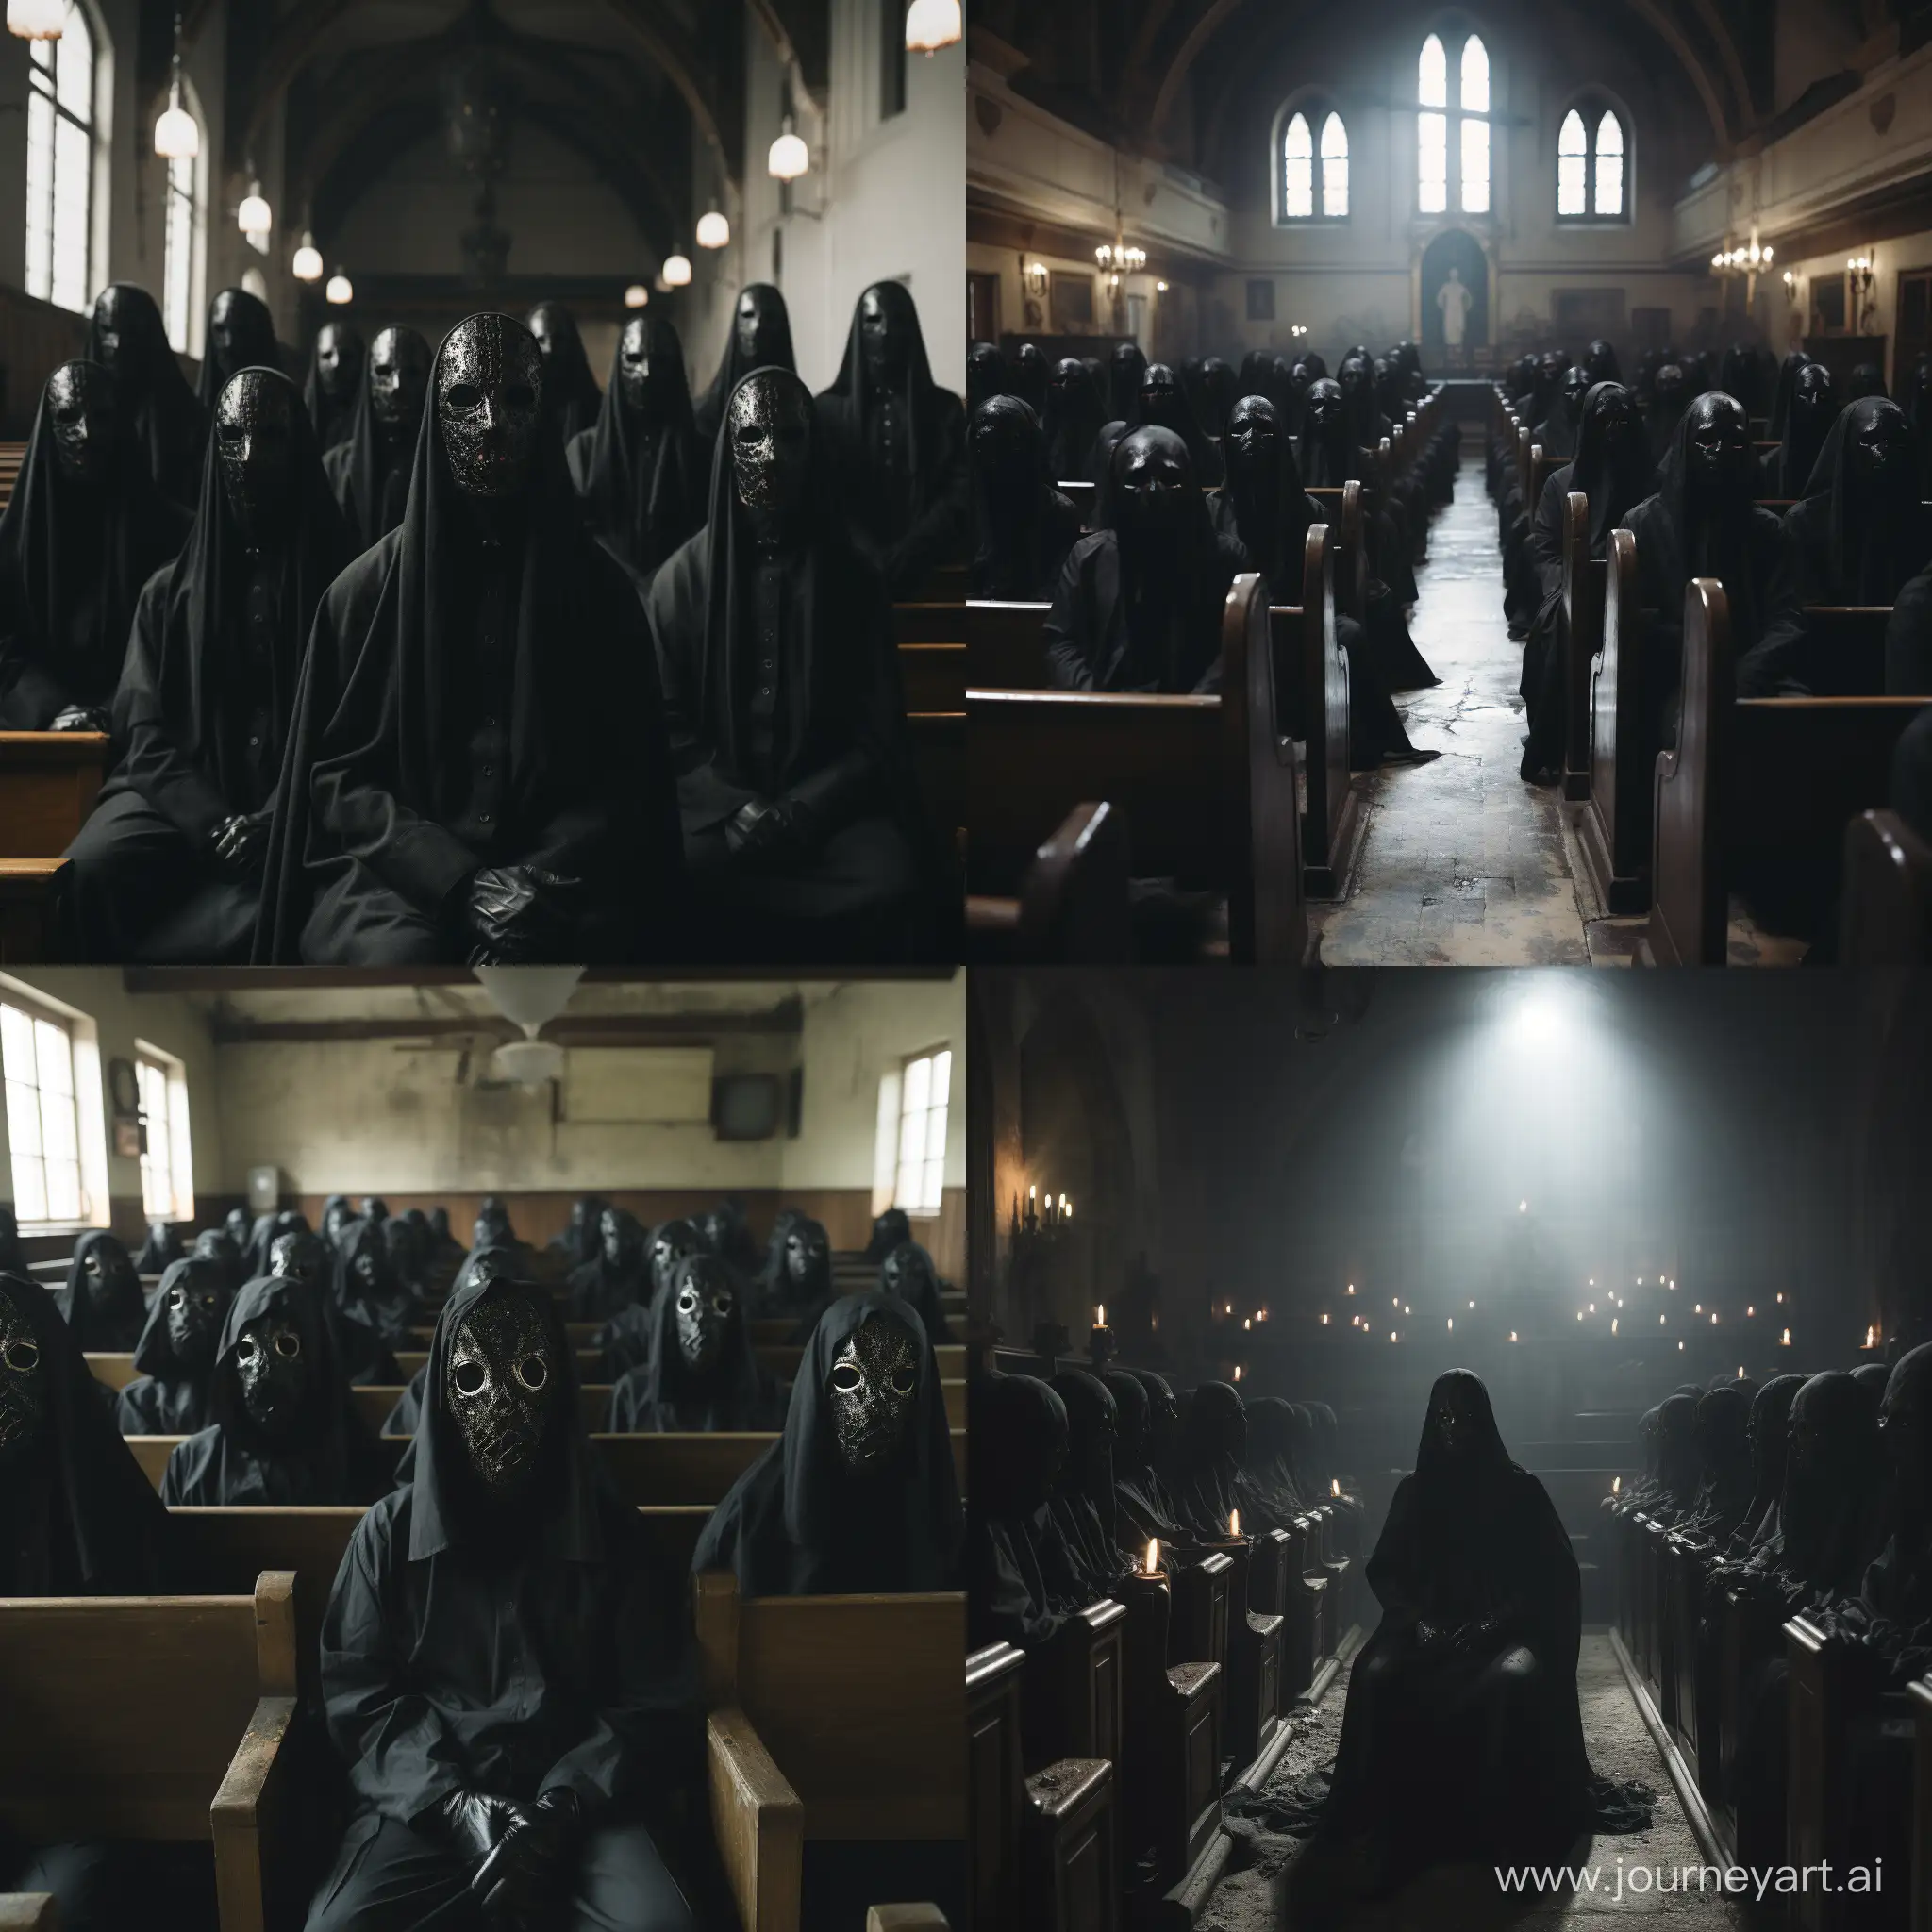 Mysterious-Black-Army-Gathering-in-Church-Creepy-CCTV-Footage